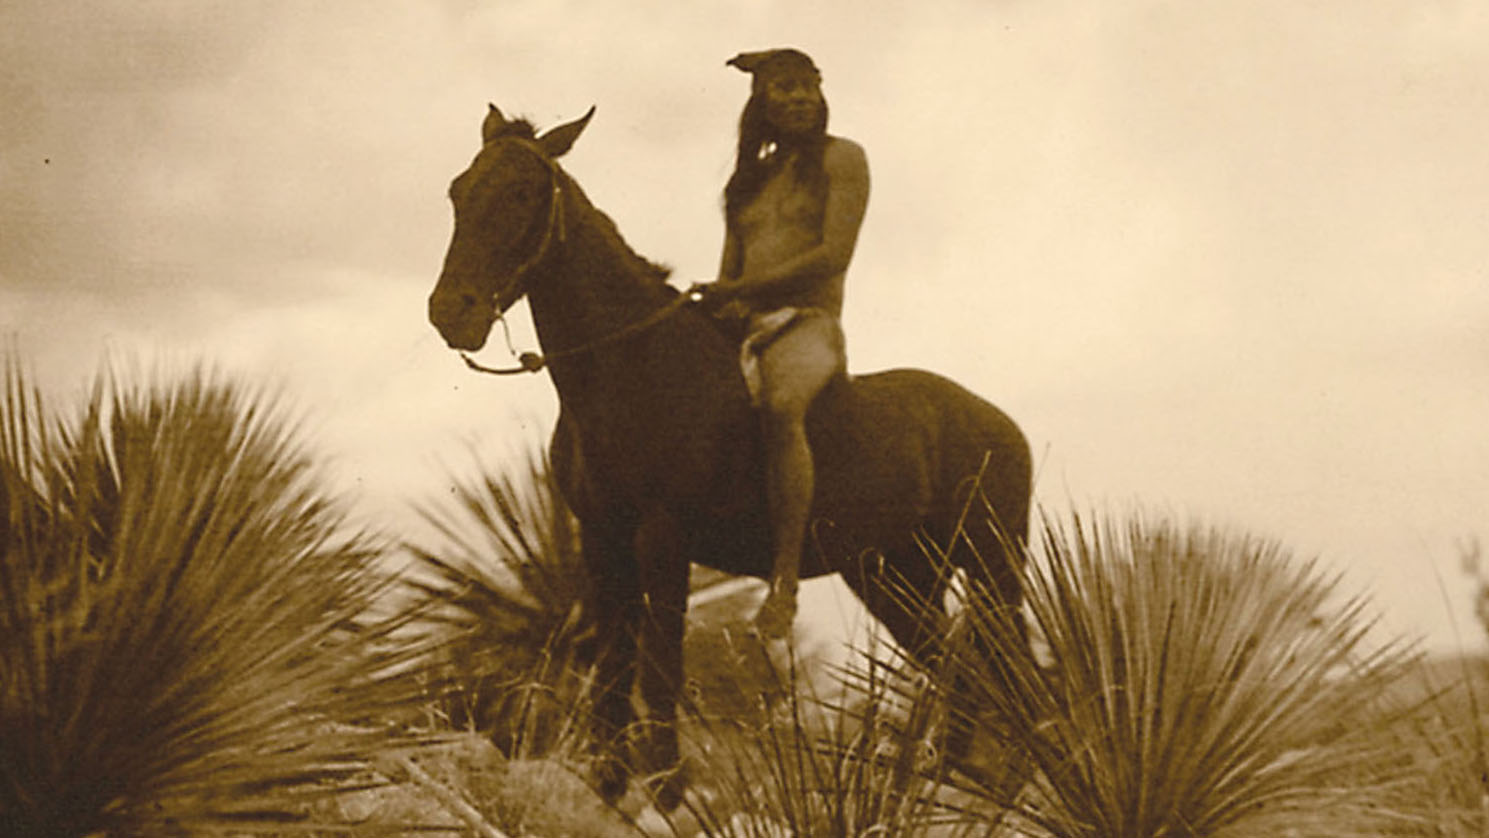 An Apache scout on horseback surveys the countryside. (Photo by Edward S. Curtis.)